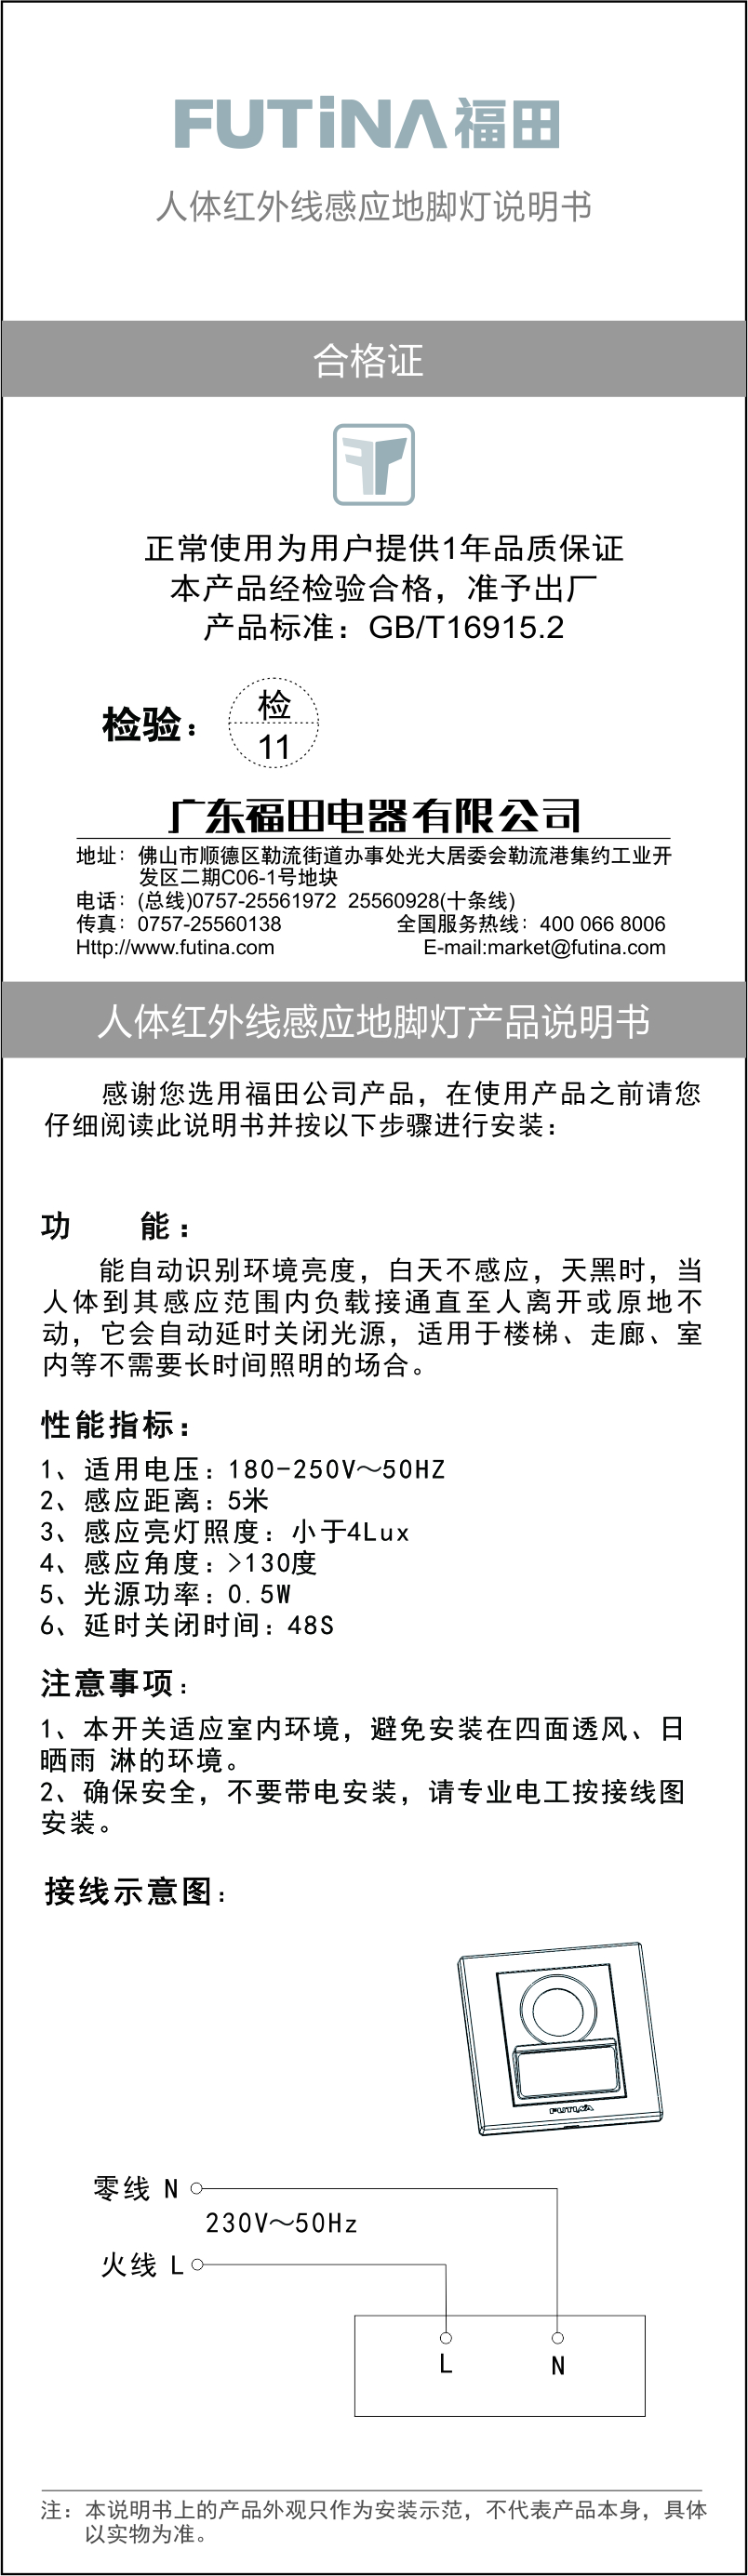 General Instructions for USB Products